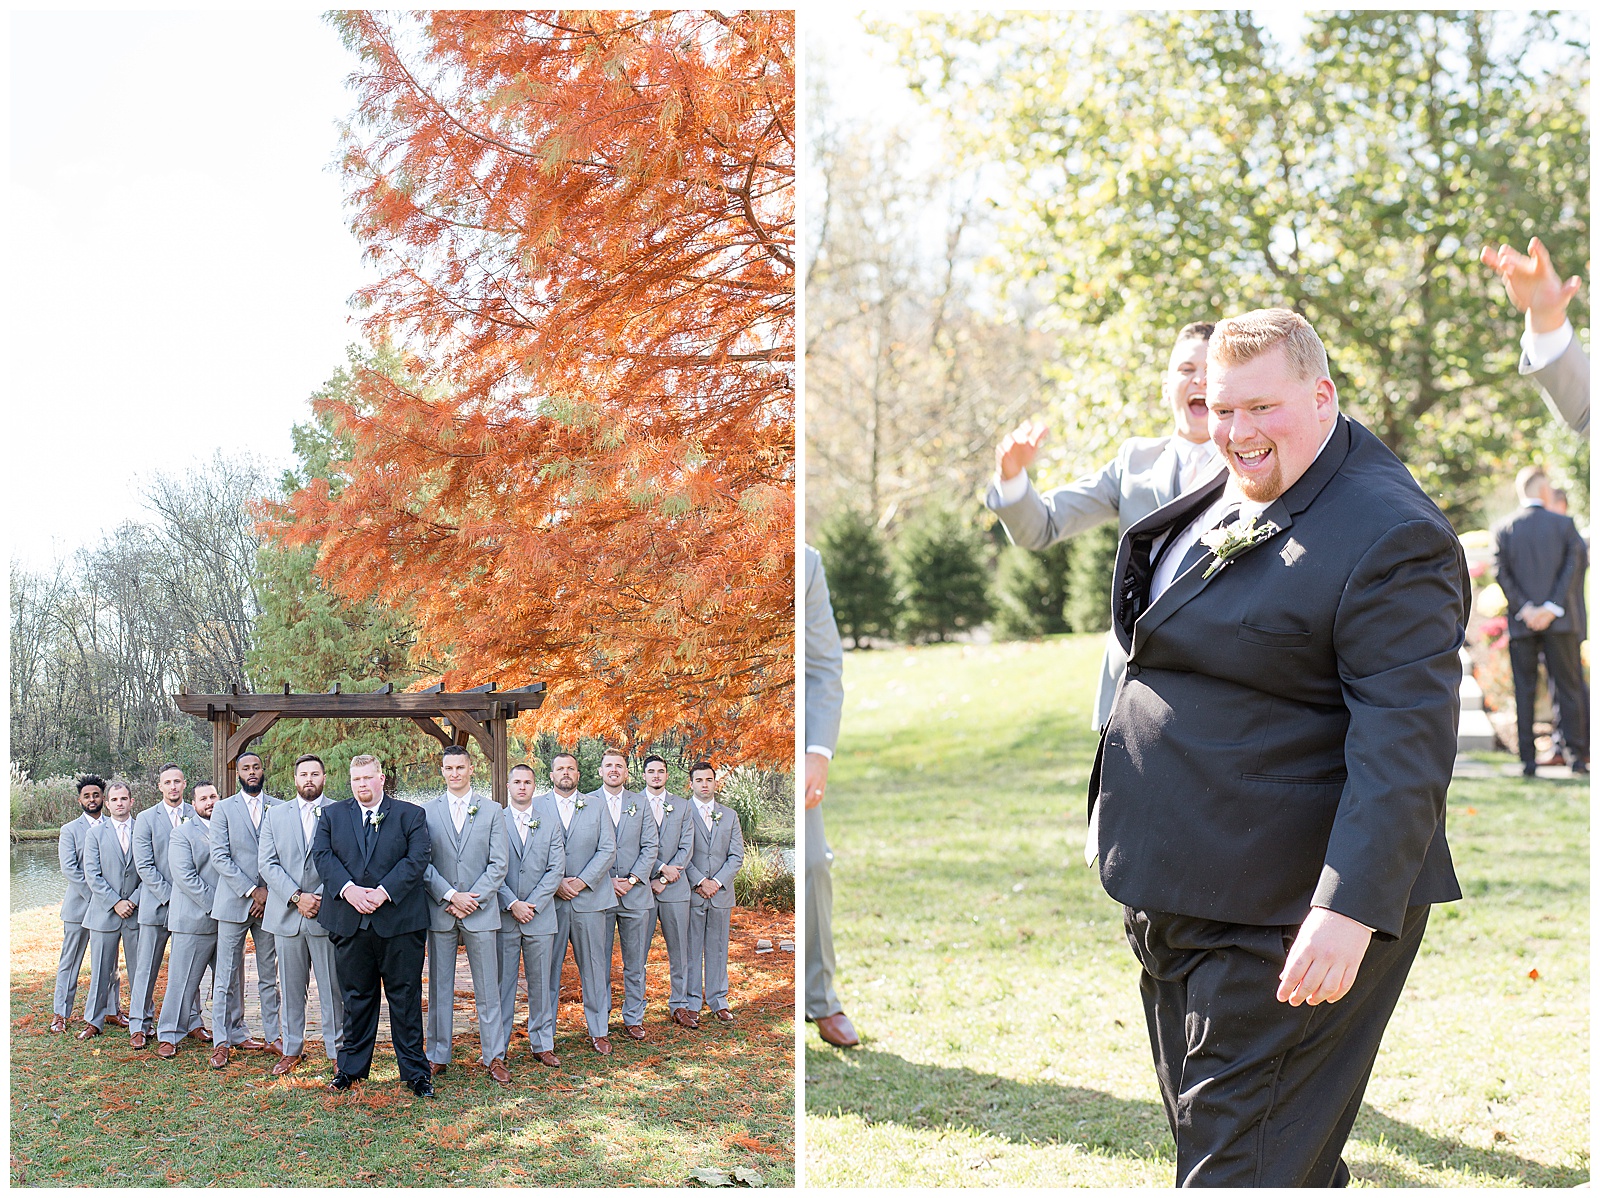 groomsmen in gray suits standing in "flying V" formation, groom smiling